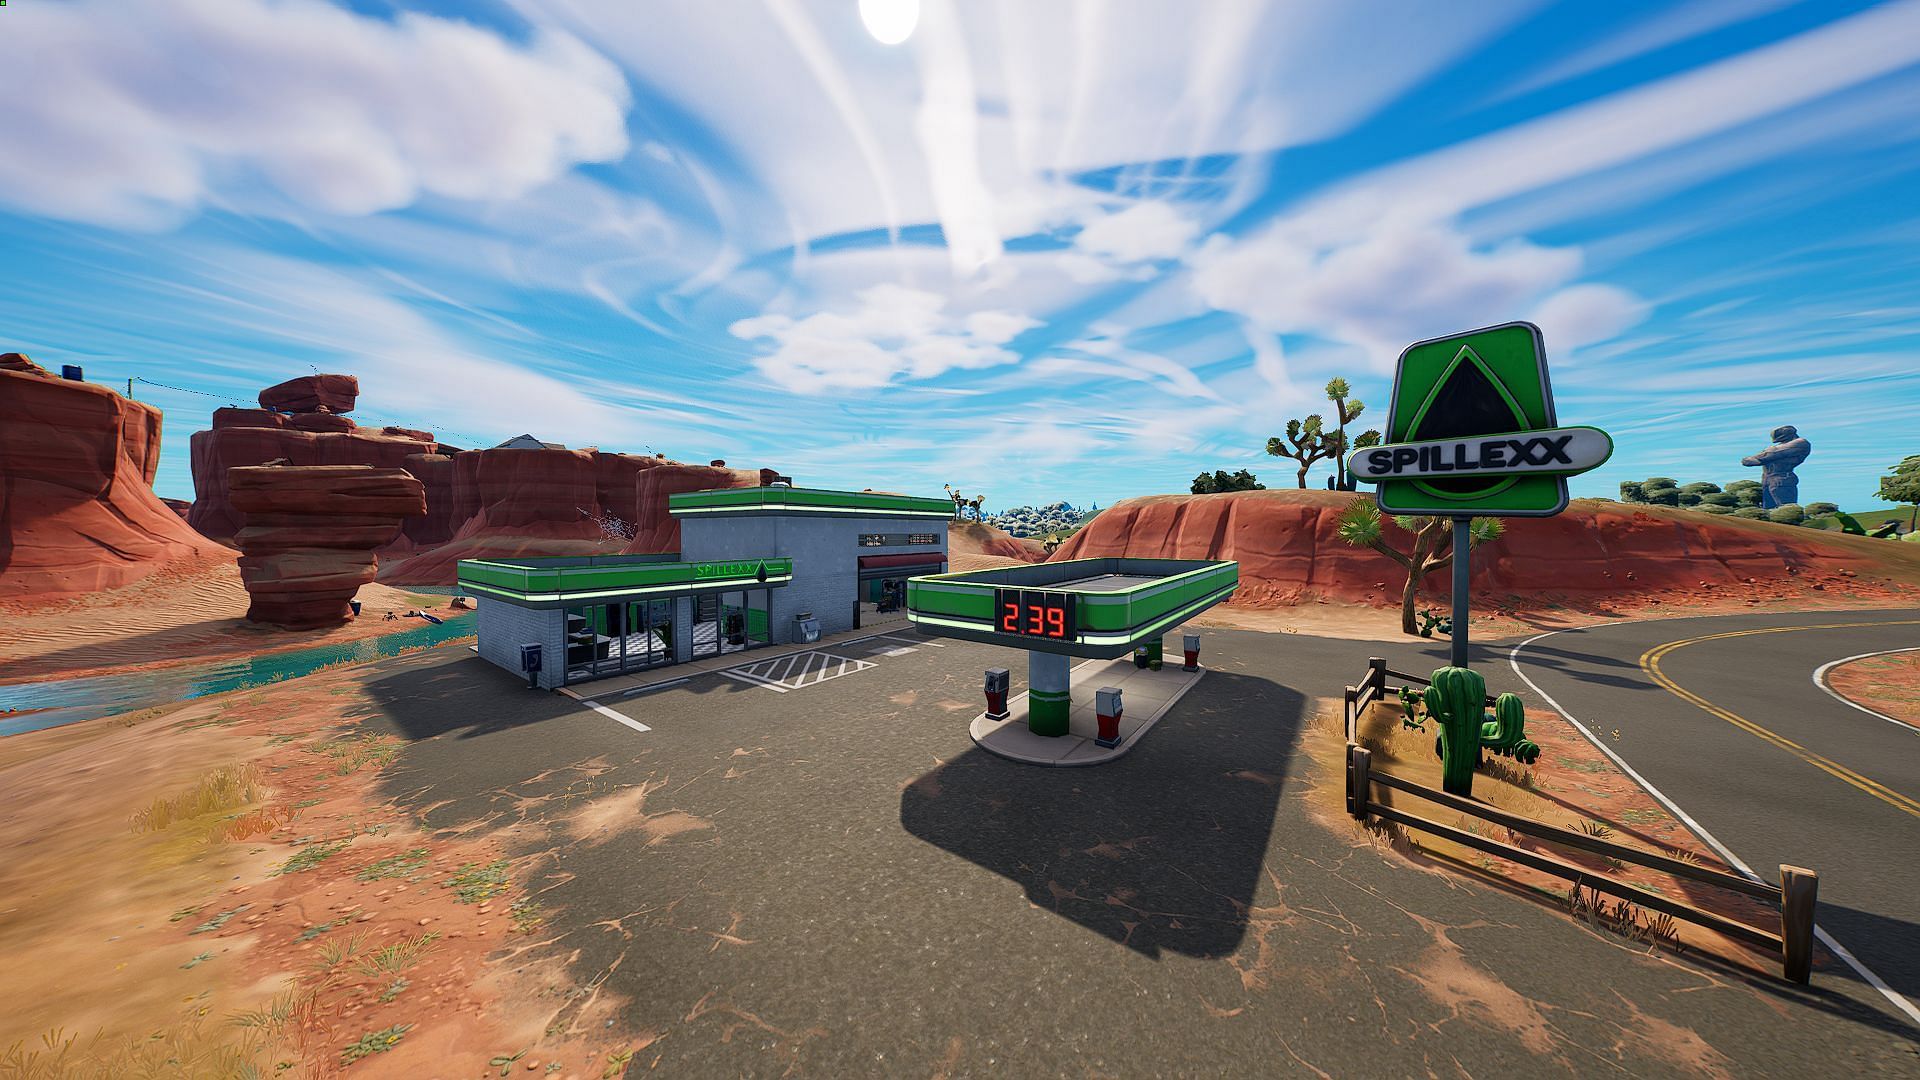 Gas Stations in Fortnite (image via Epic Games)